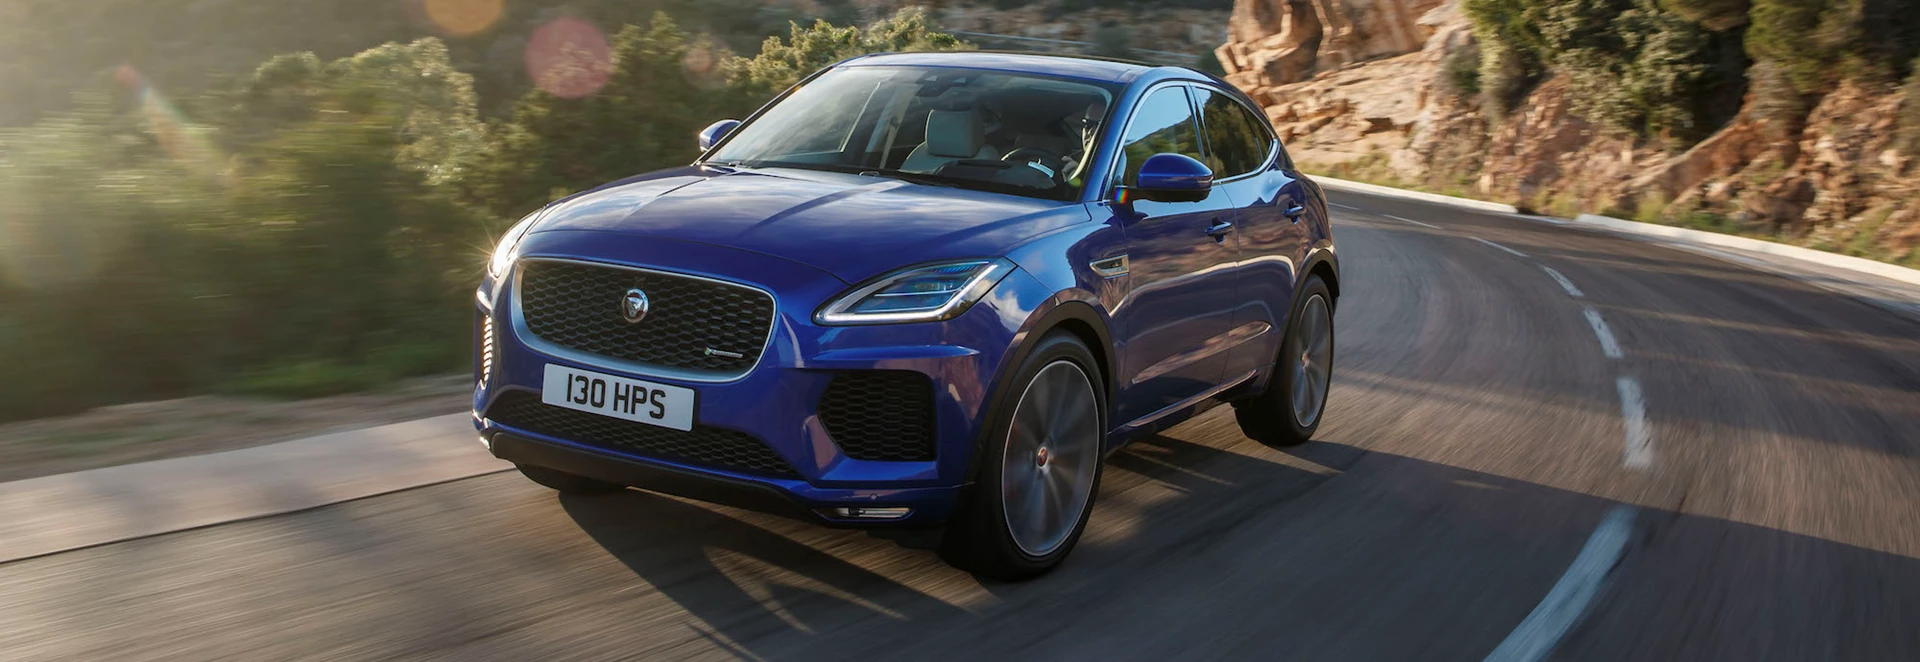 Jaguar Land Rover looks to reduce the effects of motion sickness